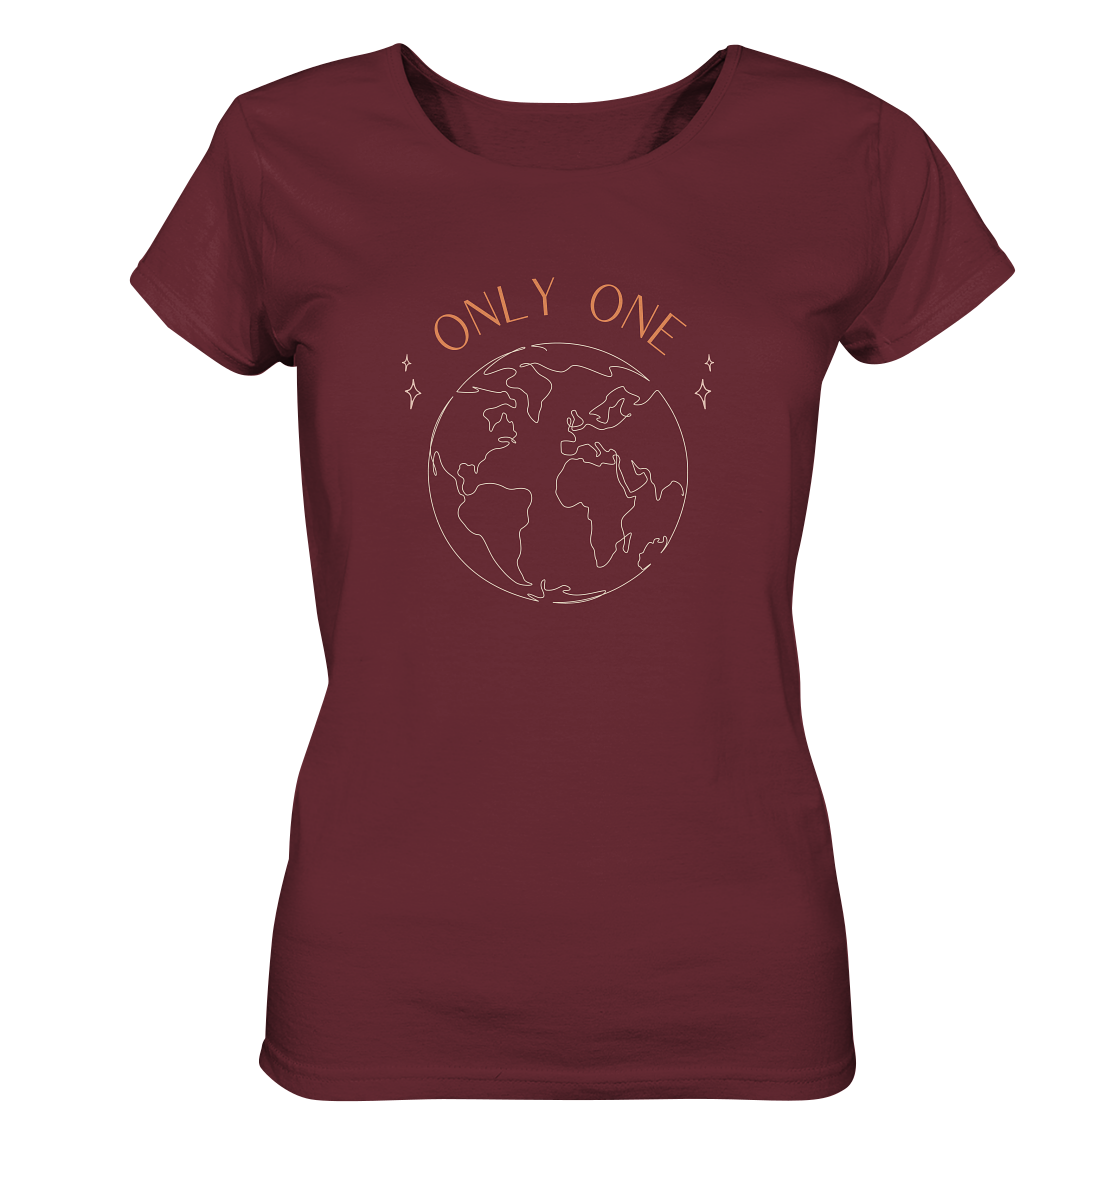 ladies organic scoop neck t-shirt saying only one earth in burgundy color